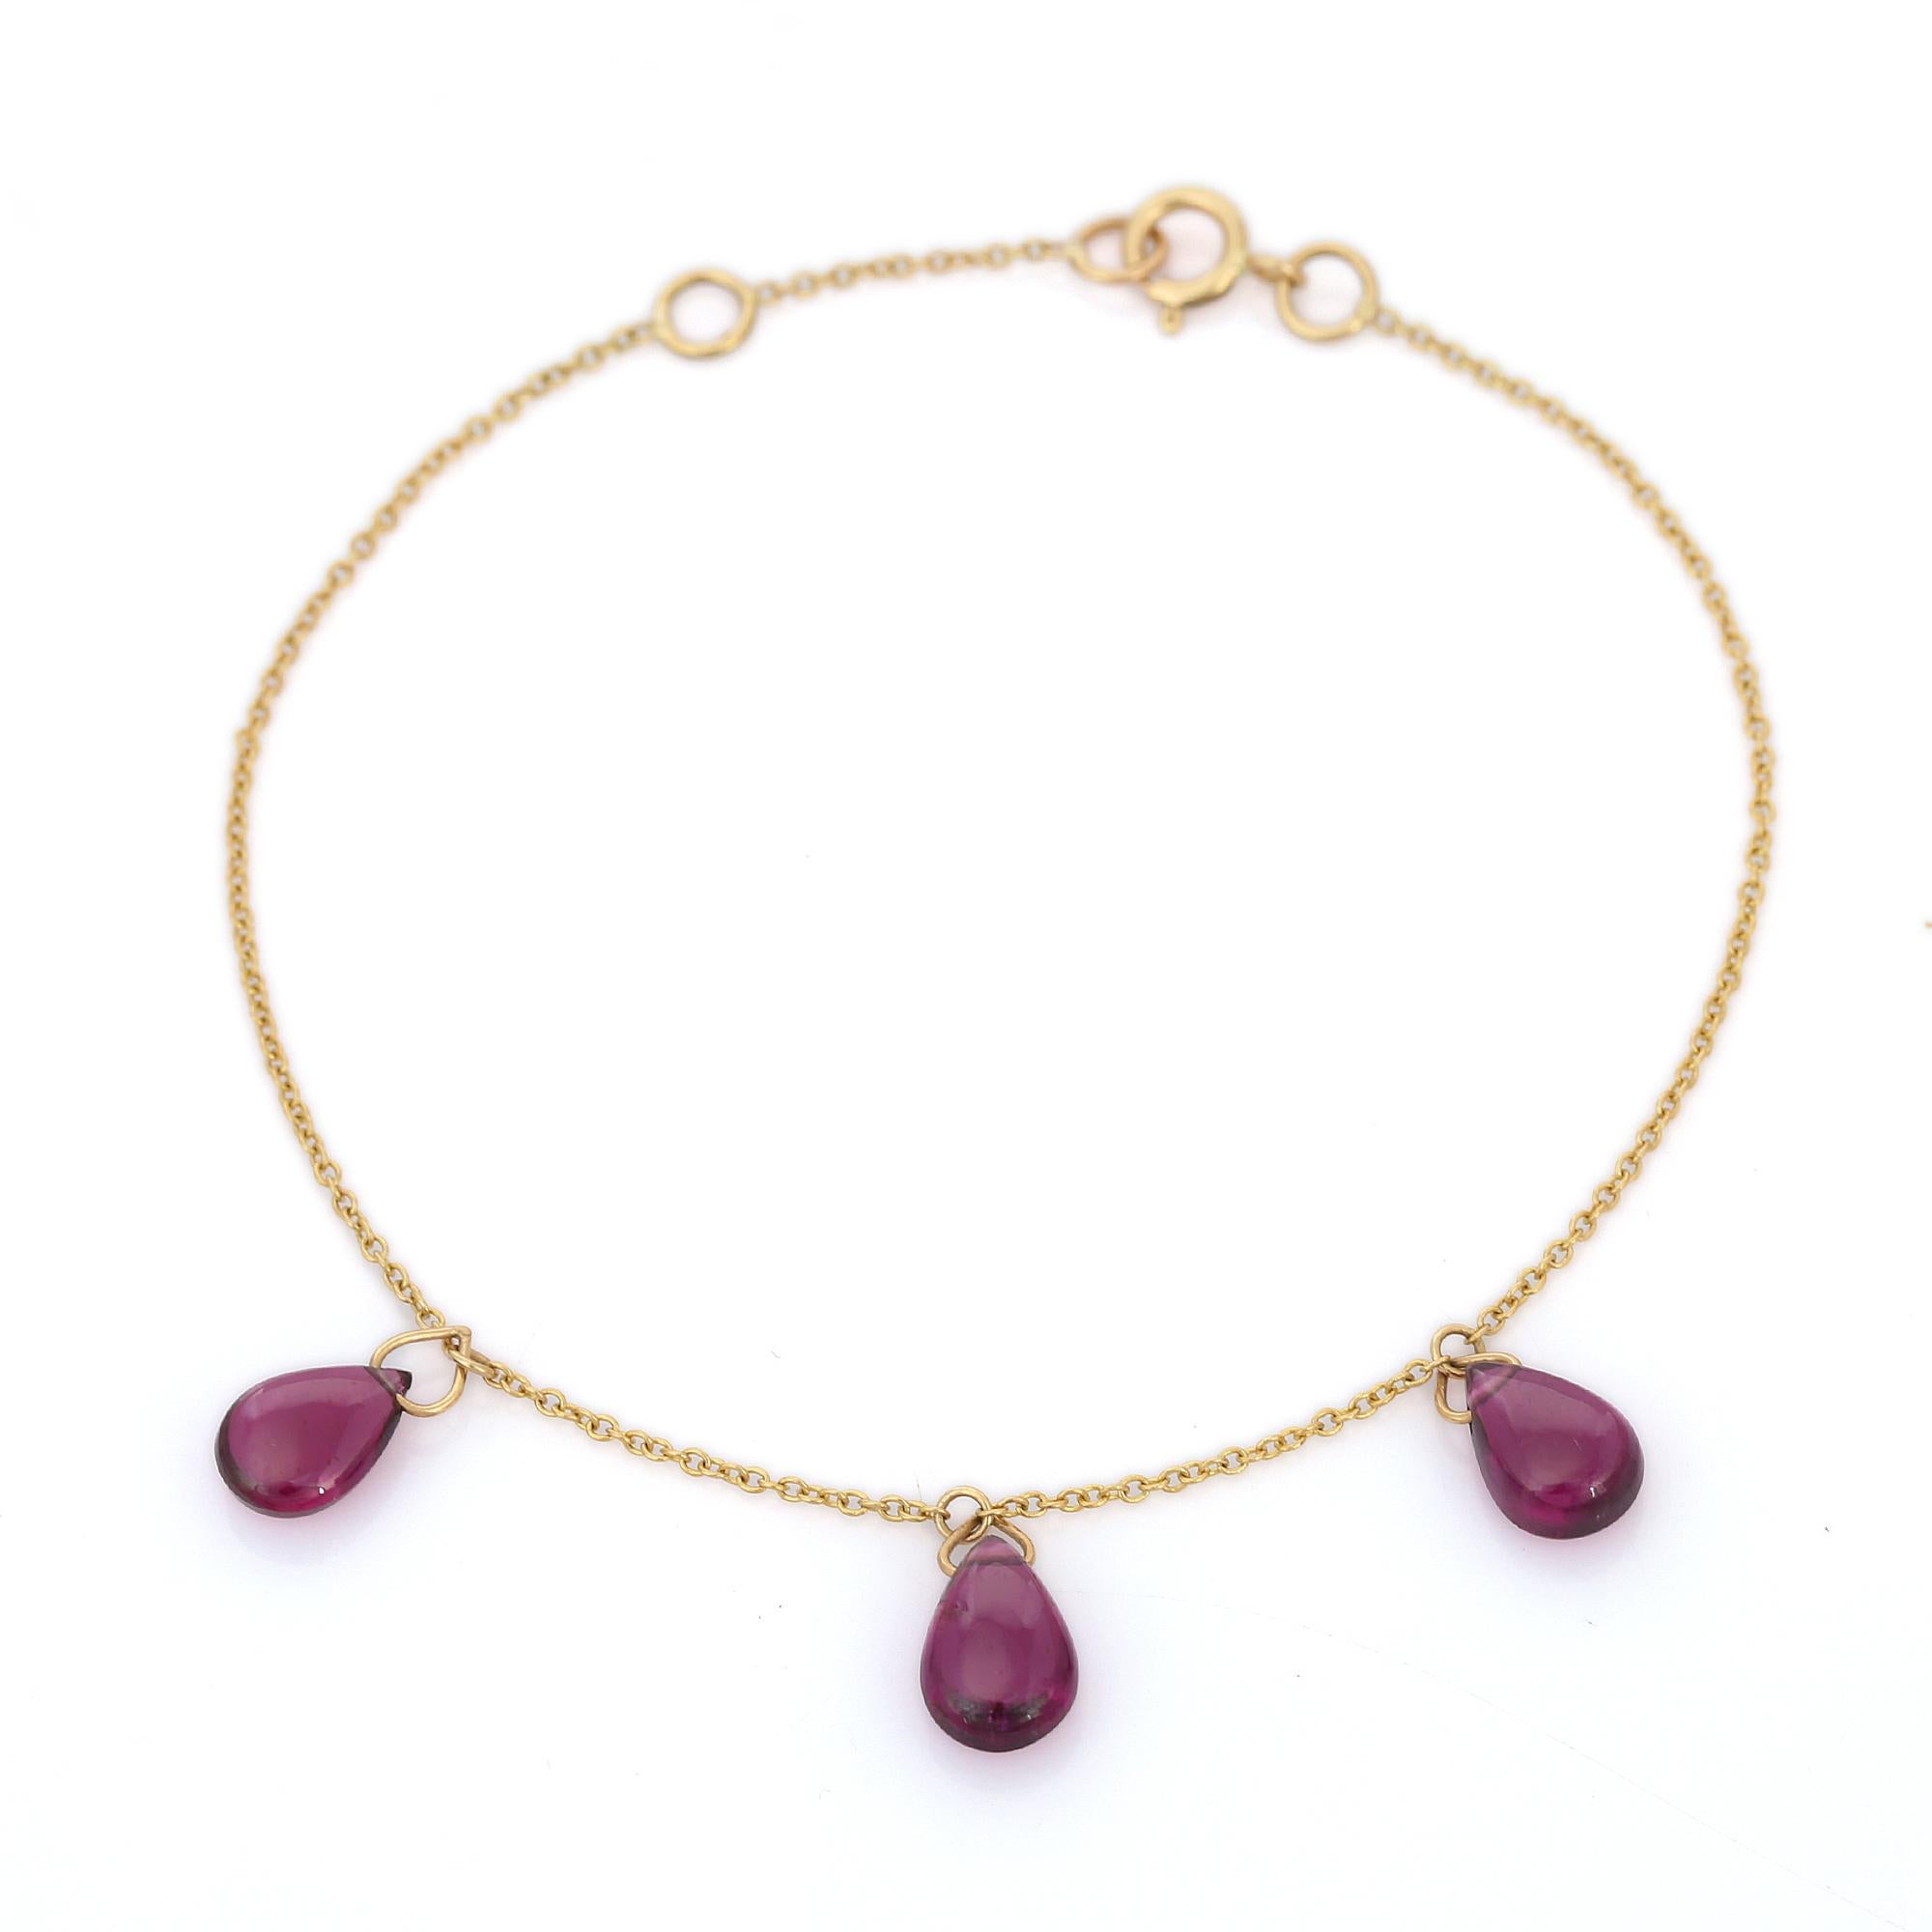 Dangling 5.2 Ct Garnet Chain Bracelet in 18K Yellow Gold In New Condition For Sale In Houston, TX